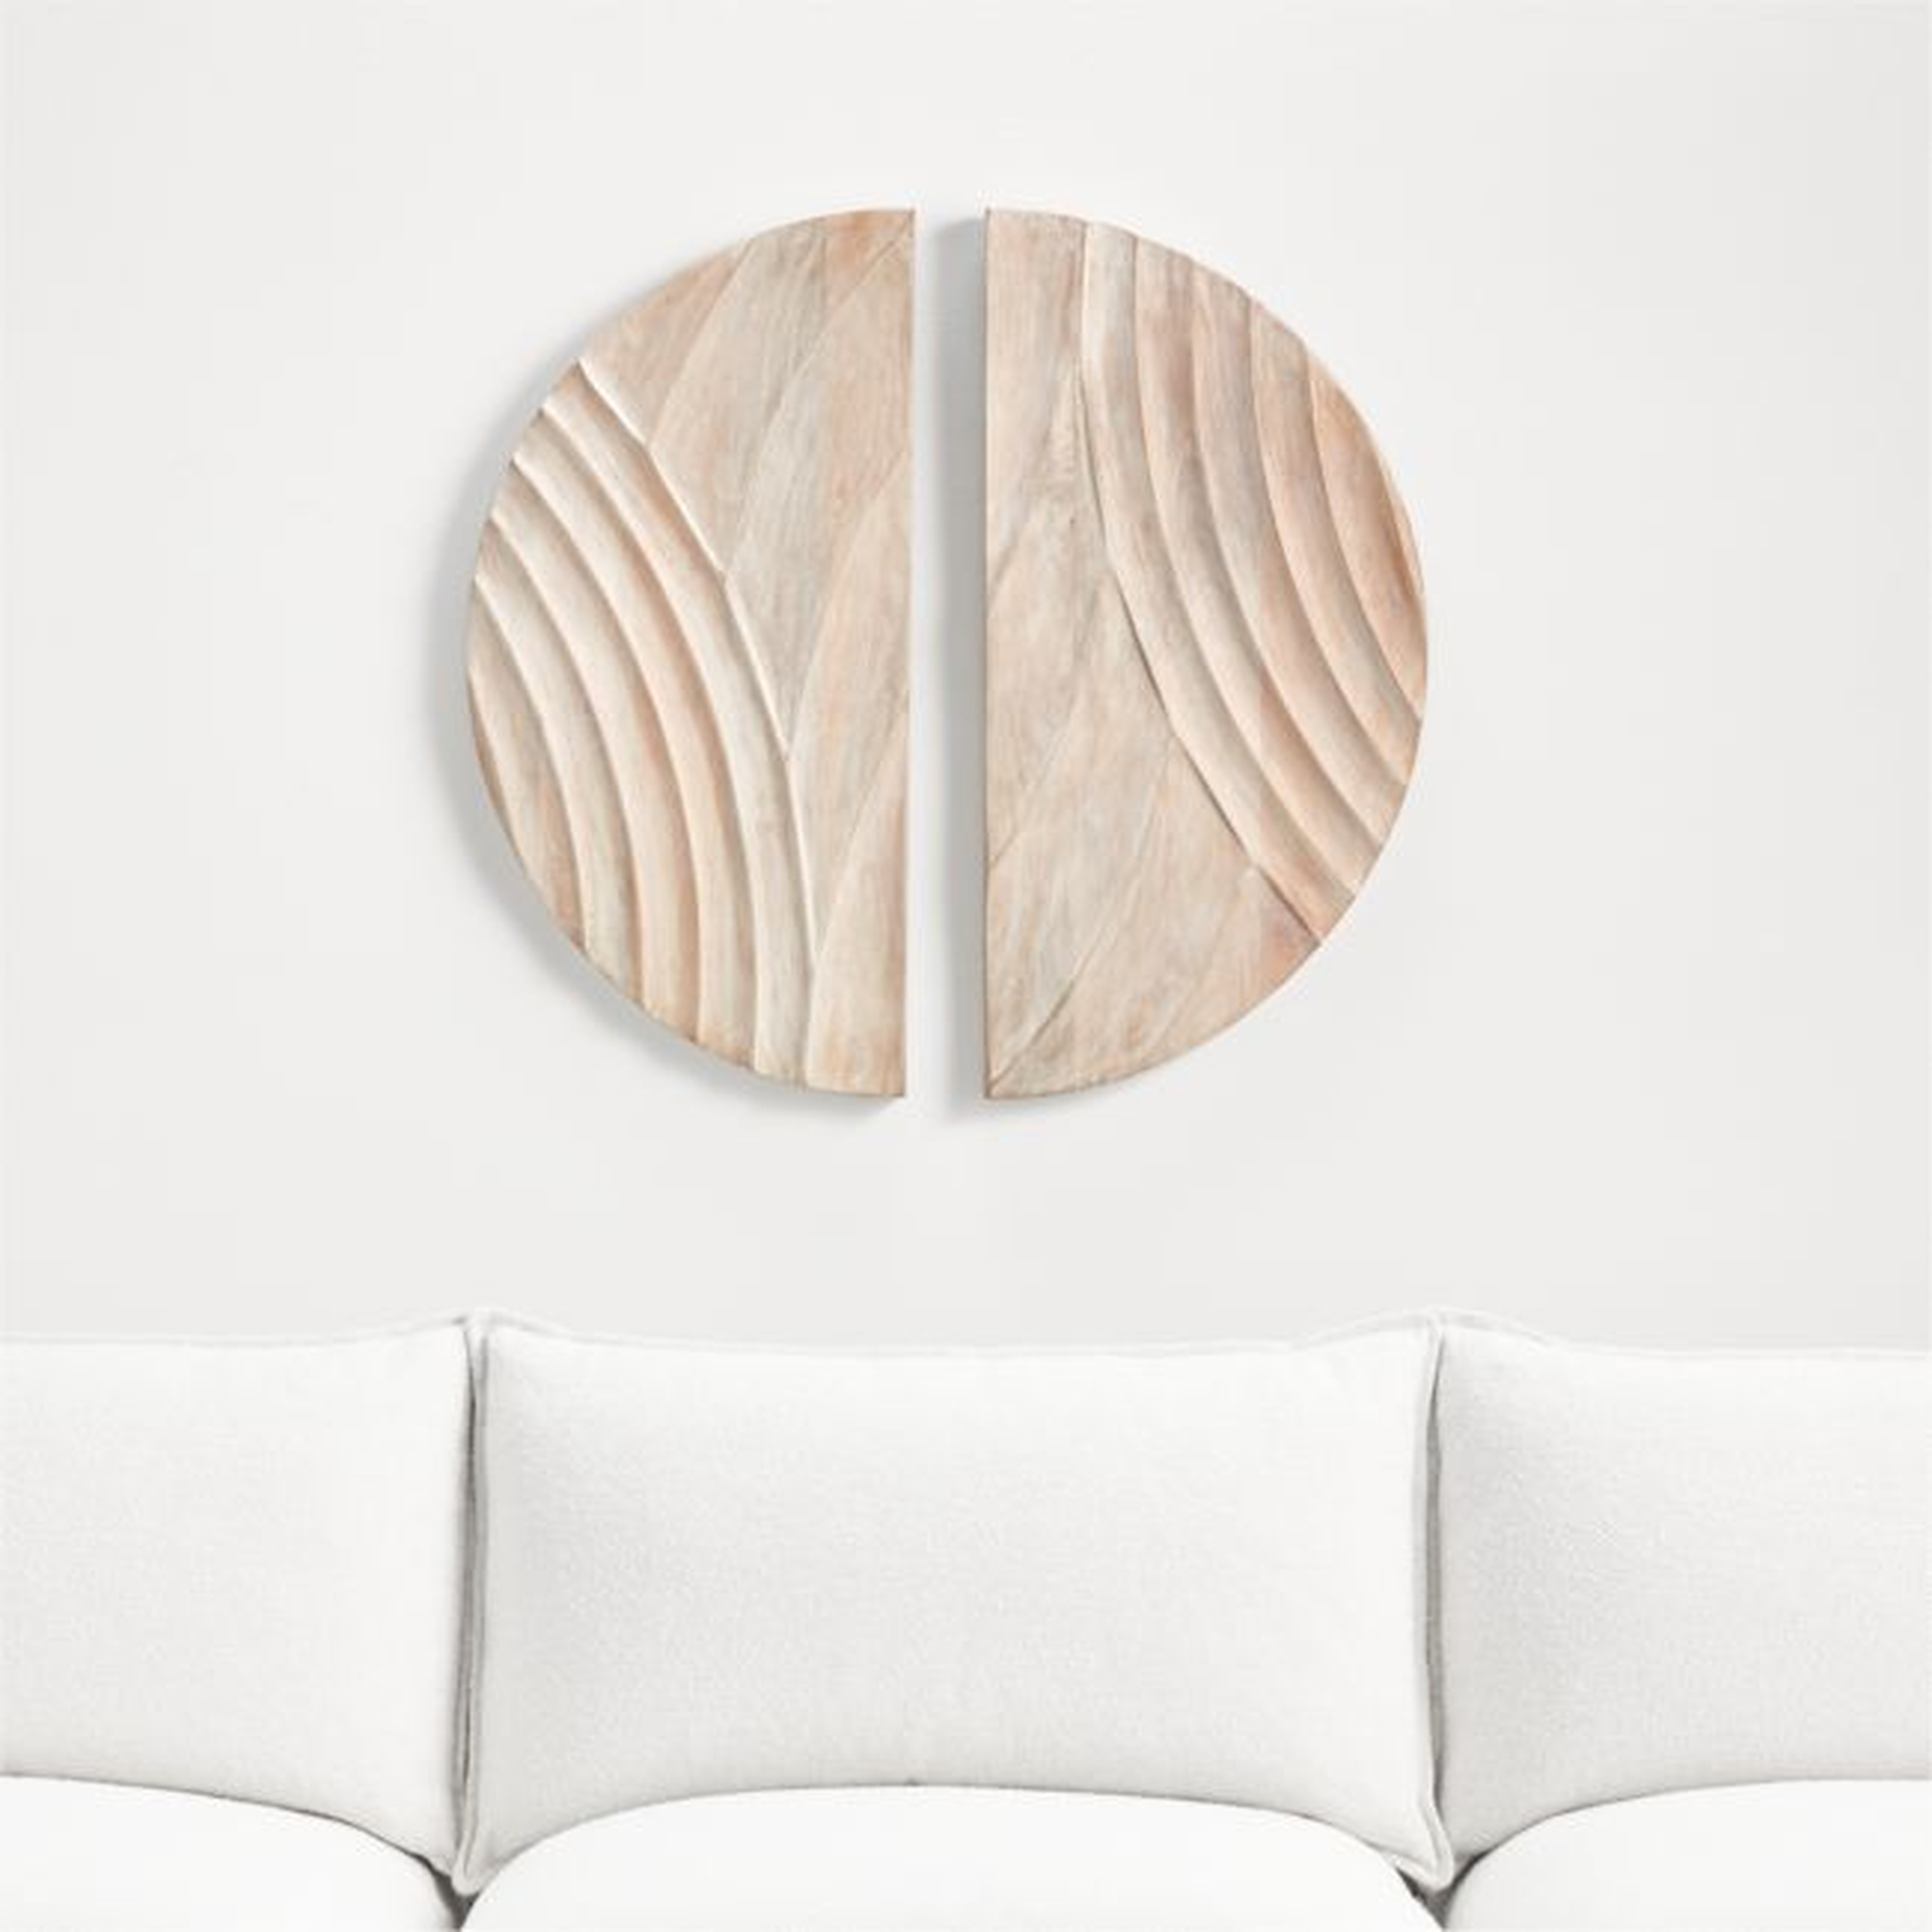 'Dune' Hand-Carved Bleached Wood Wall Art 30"x30" - Crate and Barrel